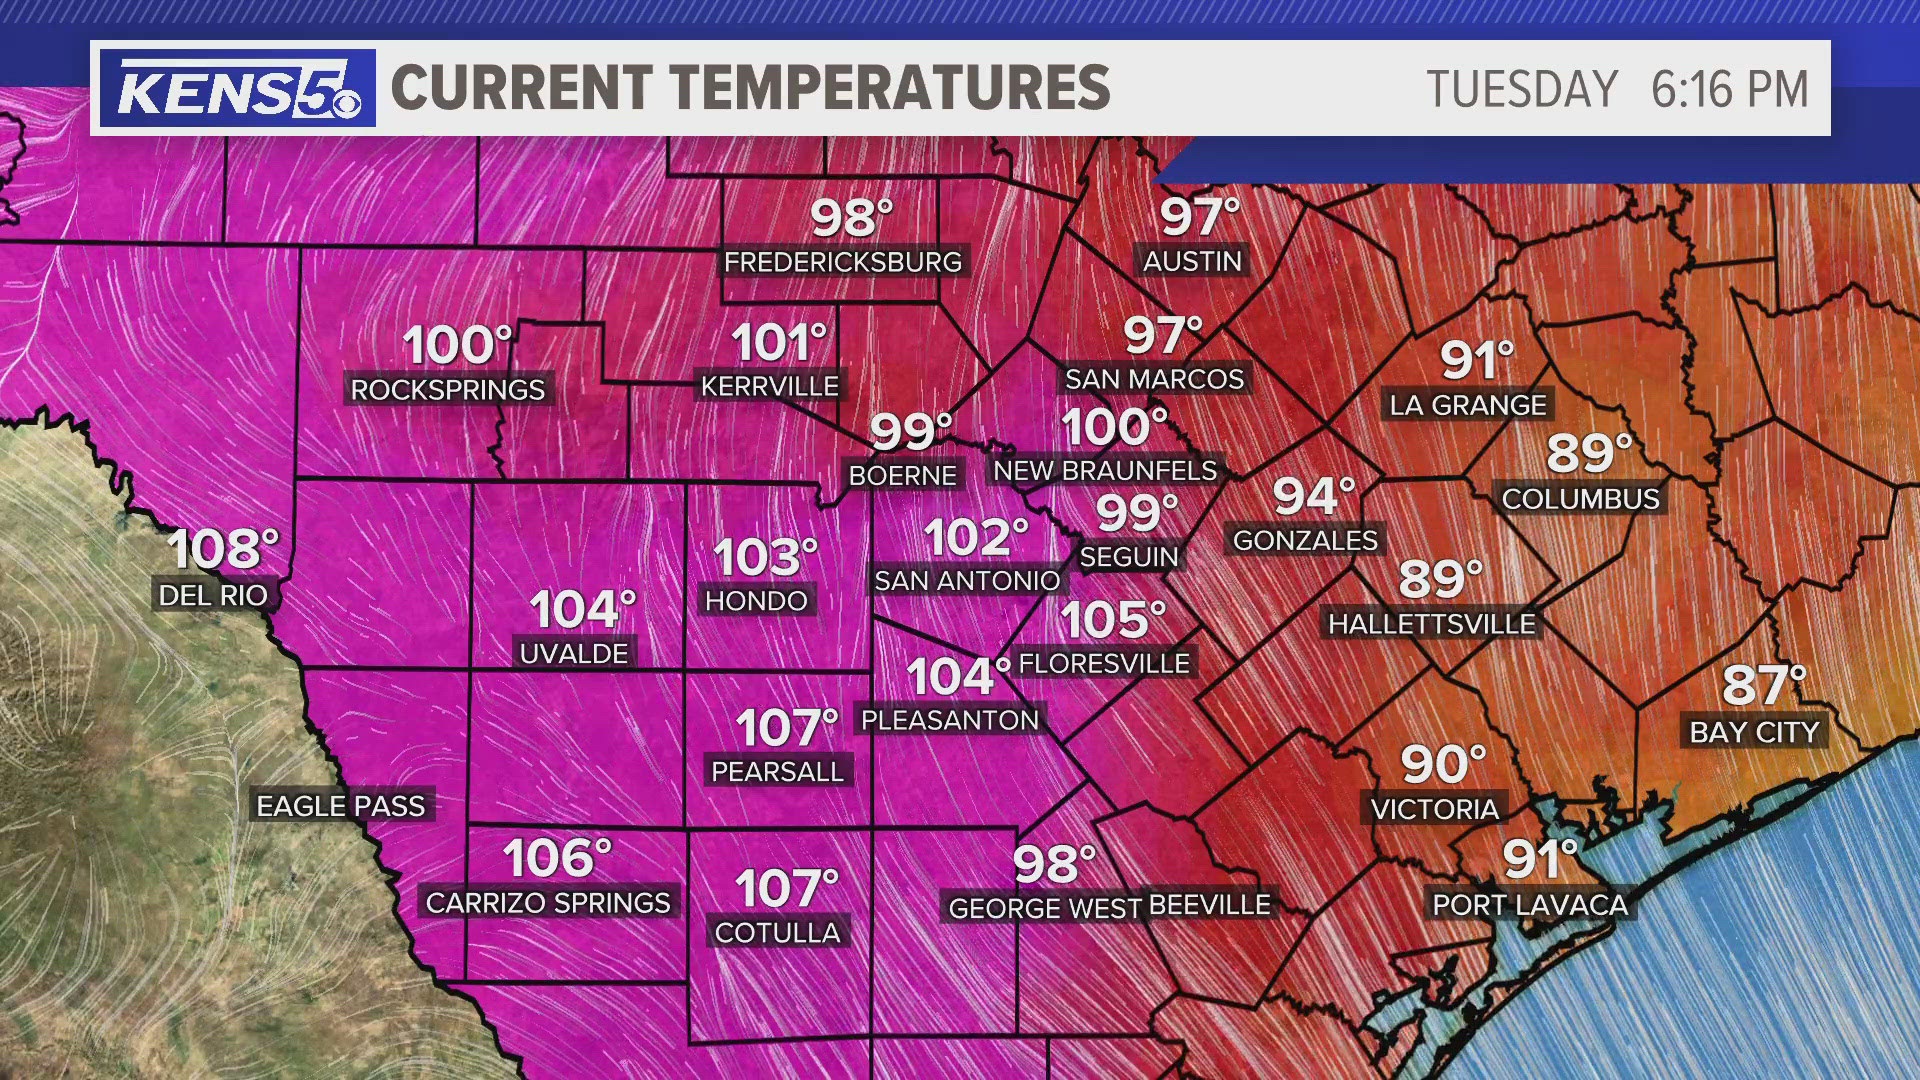 It reached 102 in the Alamo City, breaking the previous record high of 100 set in 1916.